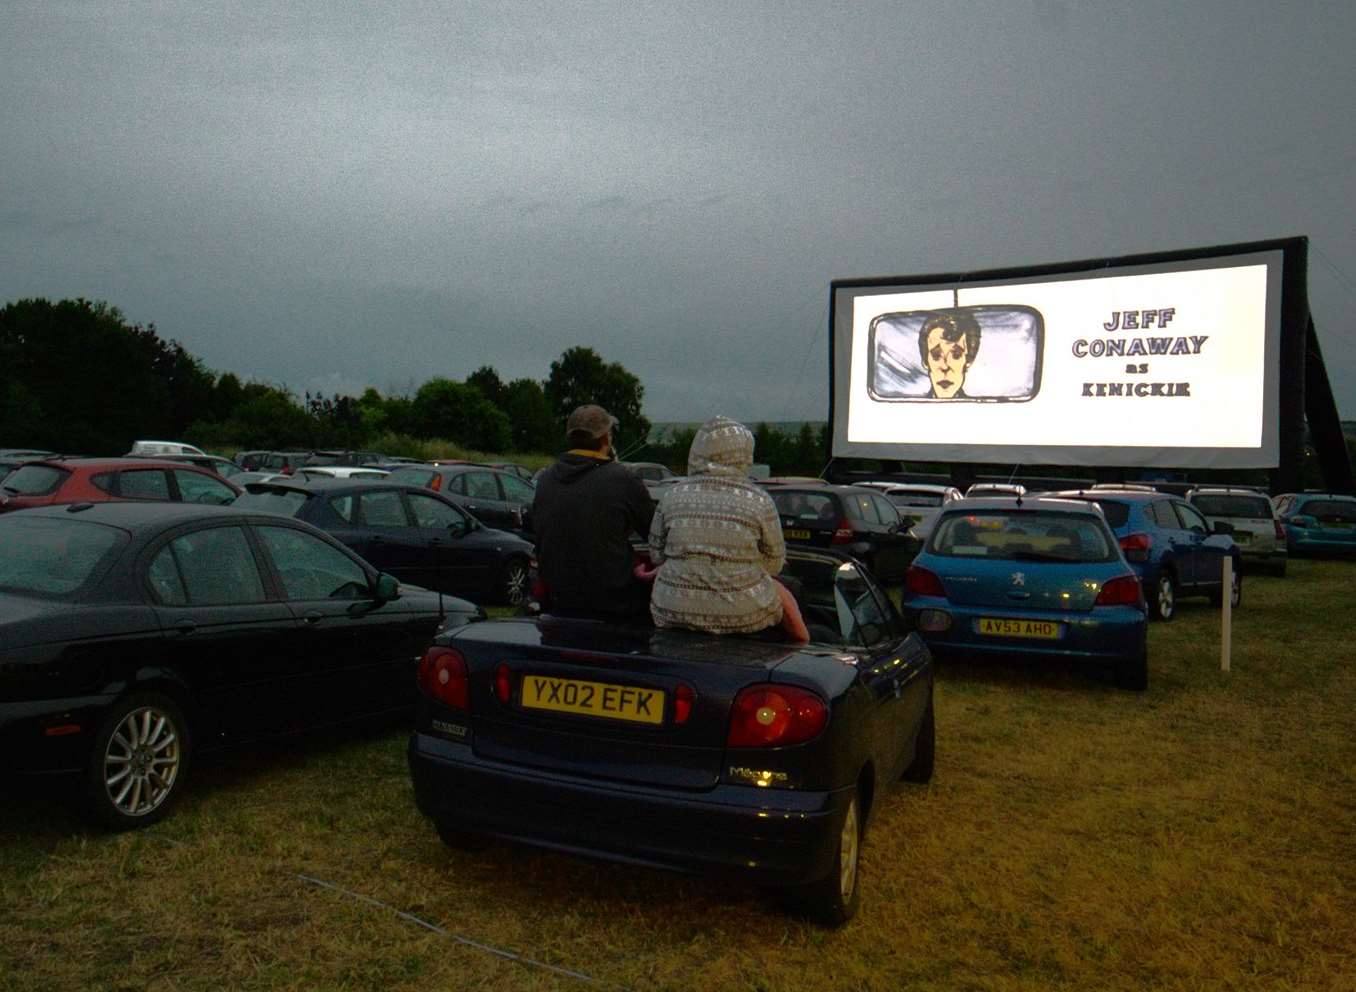 The drive-in opened in Scarborough last summer